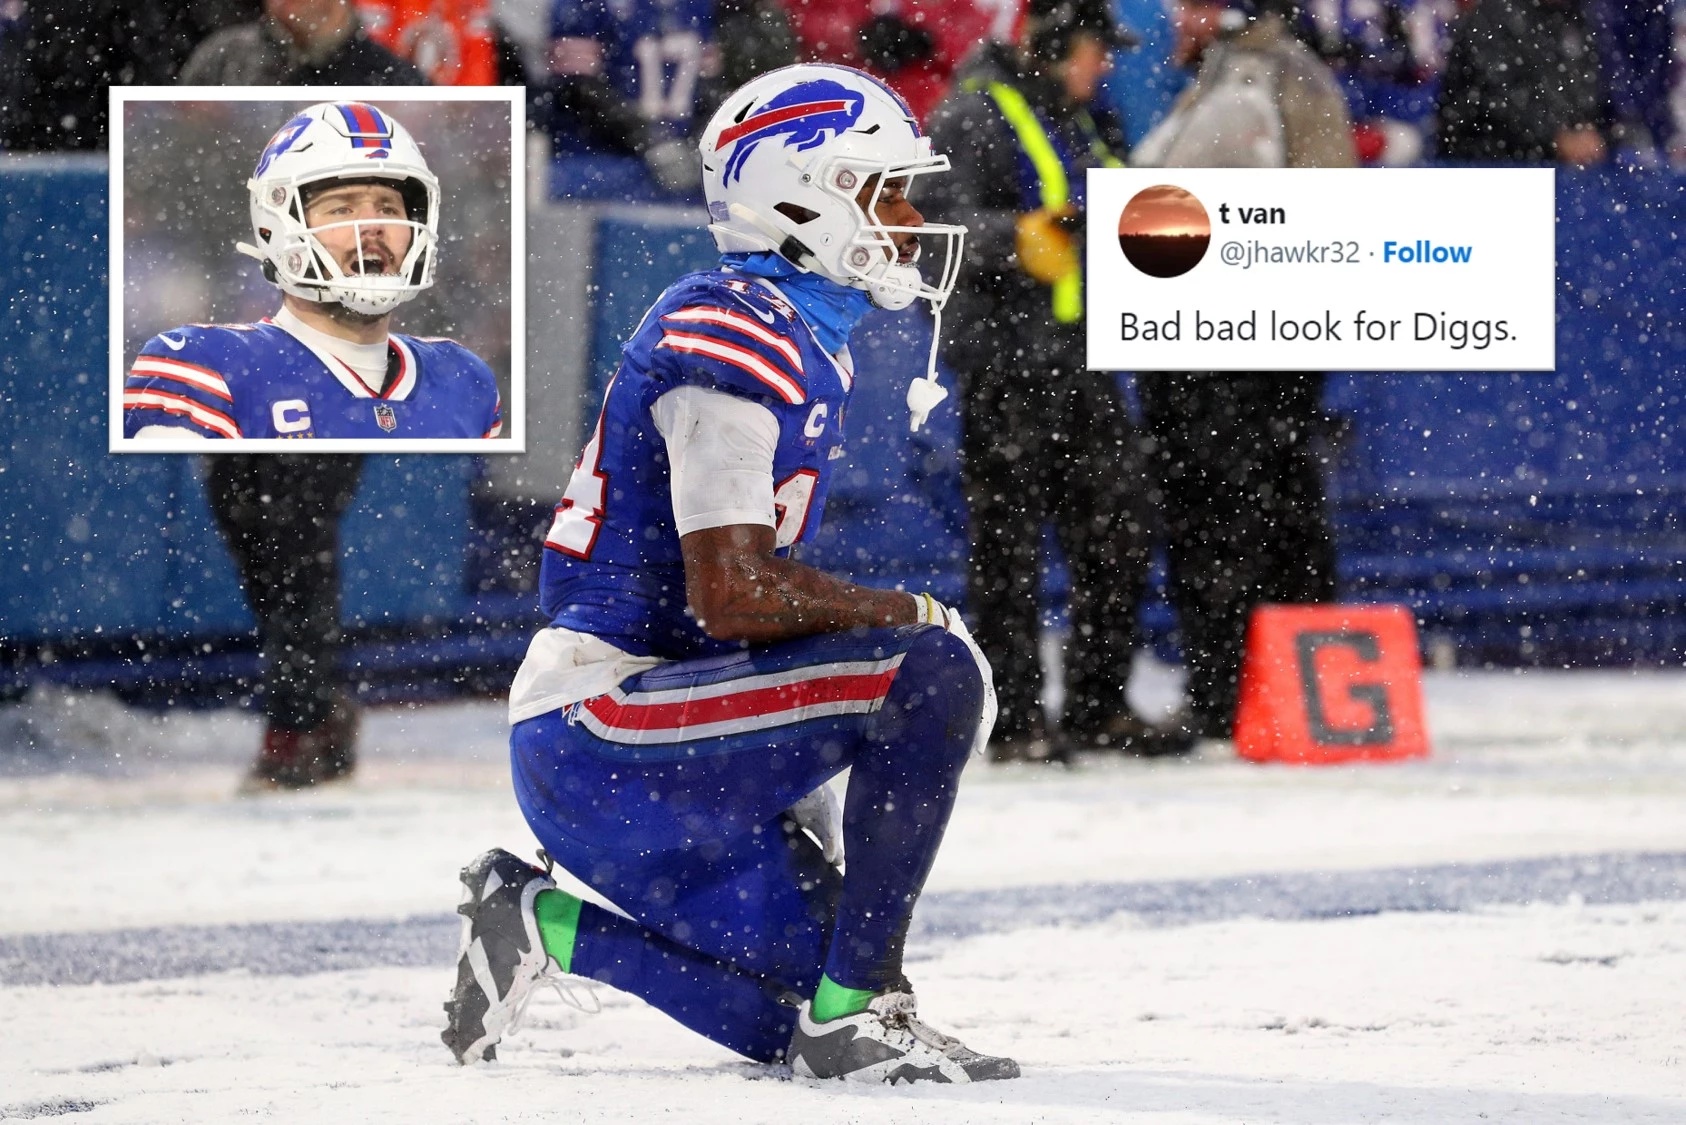 Bills Fans React to Viral Pictures of Stefon Diggs at Met Gala